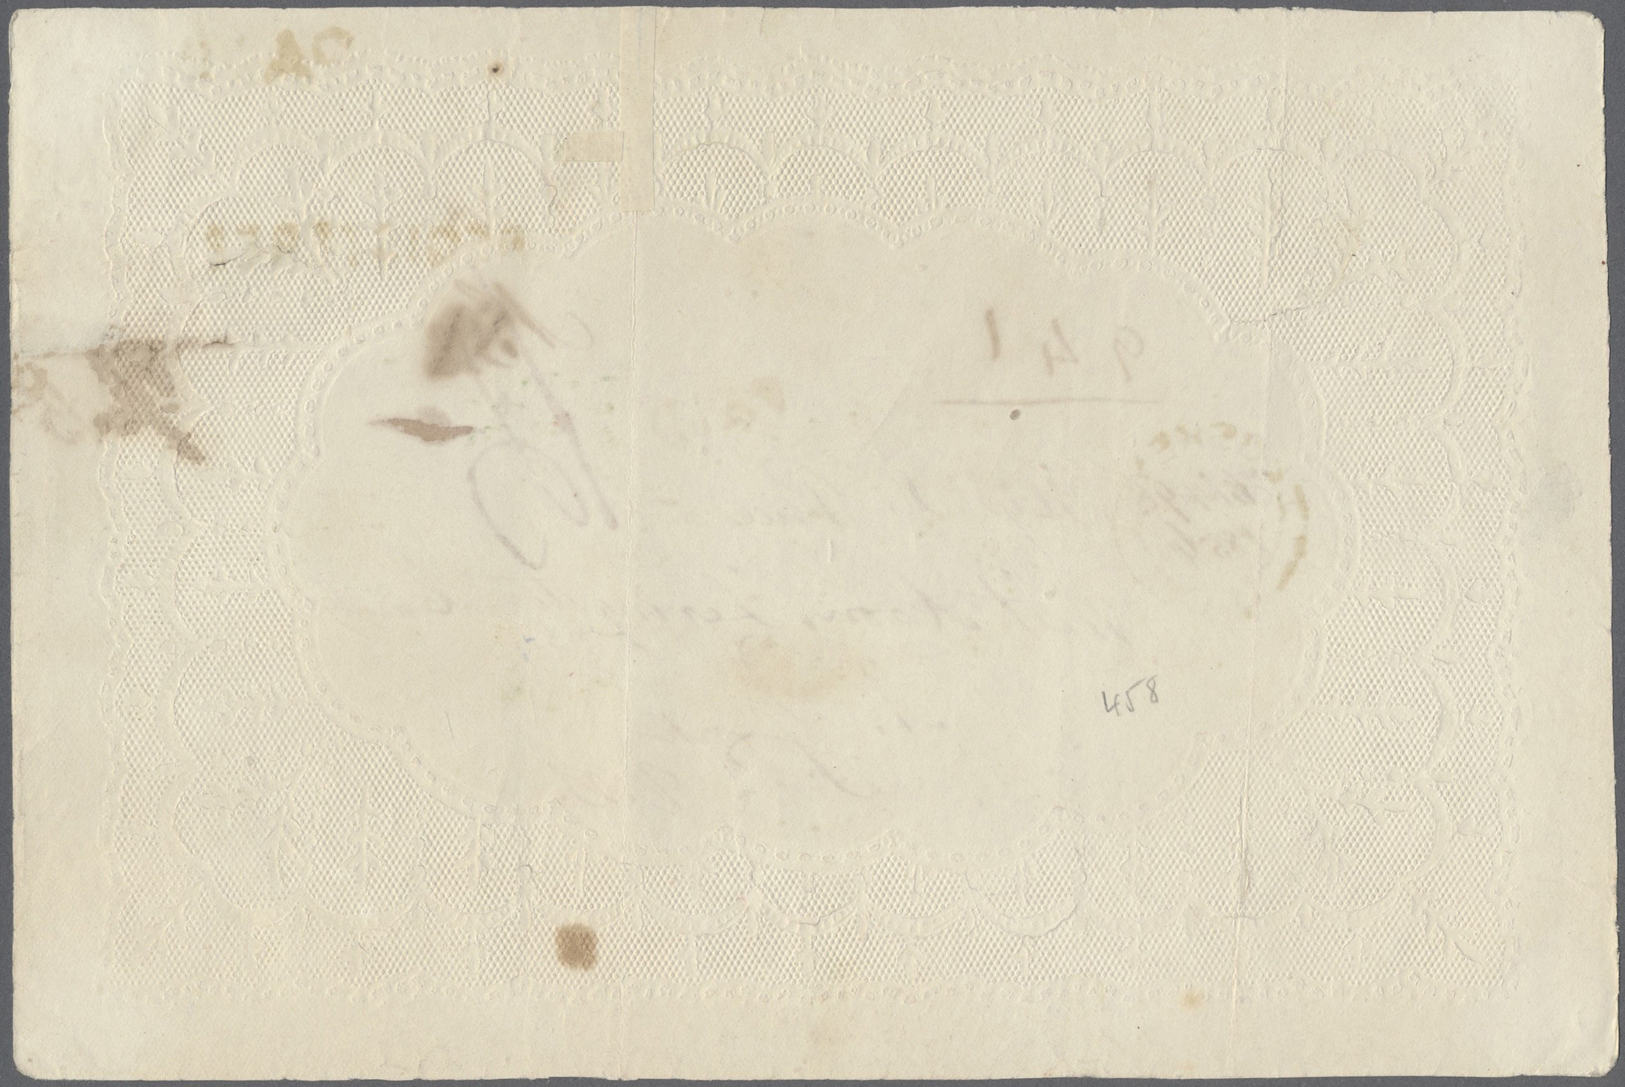 Br Canada - Colony Of Canada: 1856, 3p. Red And 6p. Grey Each Tied By Clear "PAID" On Cover Front, "LOSKEY U.C. FEBR/9th - ...-1851 Prephilately